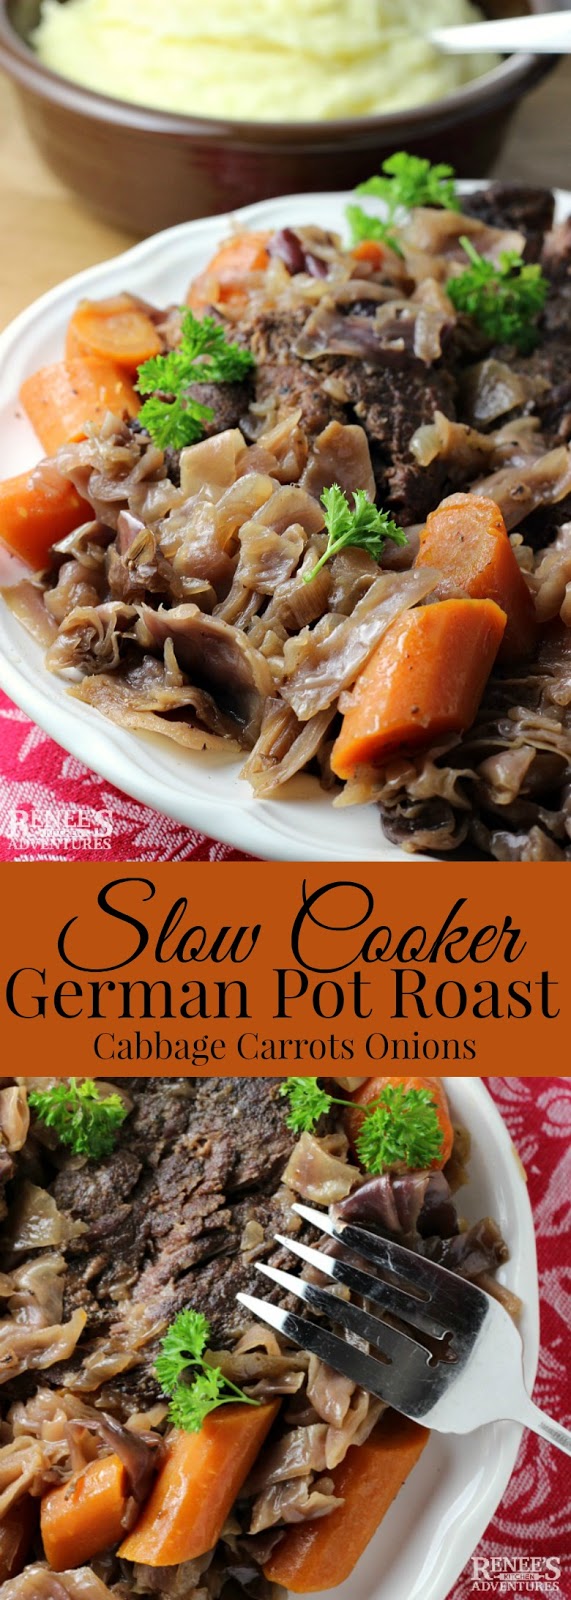 Slow Cooker German Style Pot Roast | by Renee's Kitchen Adventures - Slow Cooker (Crock Pot) recipe for tender a seasoned tender chuck roast braised with cabbage, onion, and carrots. It's a comfort food classic with a twist! Perfect weeknight or weekend meal. #BestAngusBeef #CertifiedAngusBeef #ad